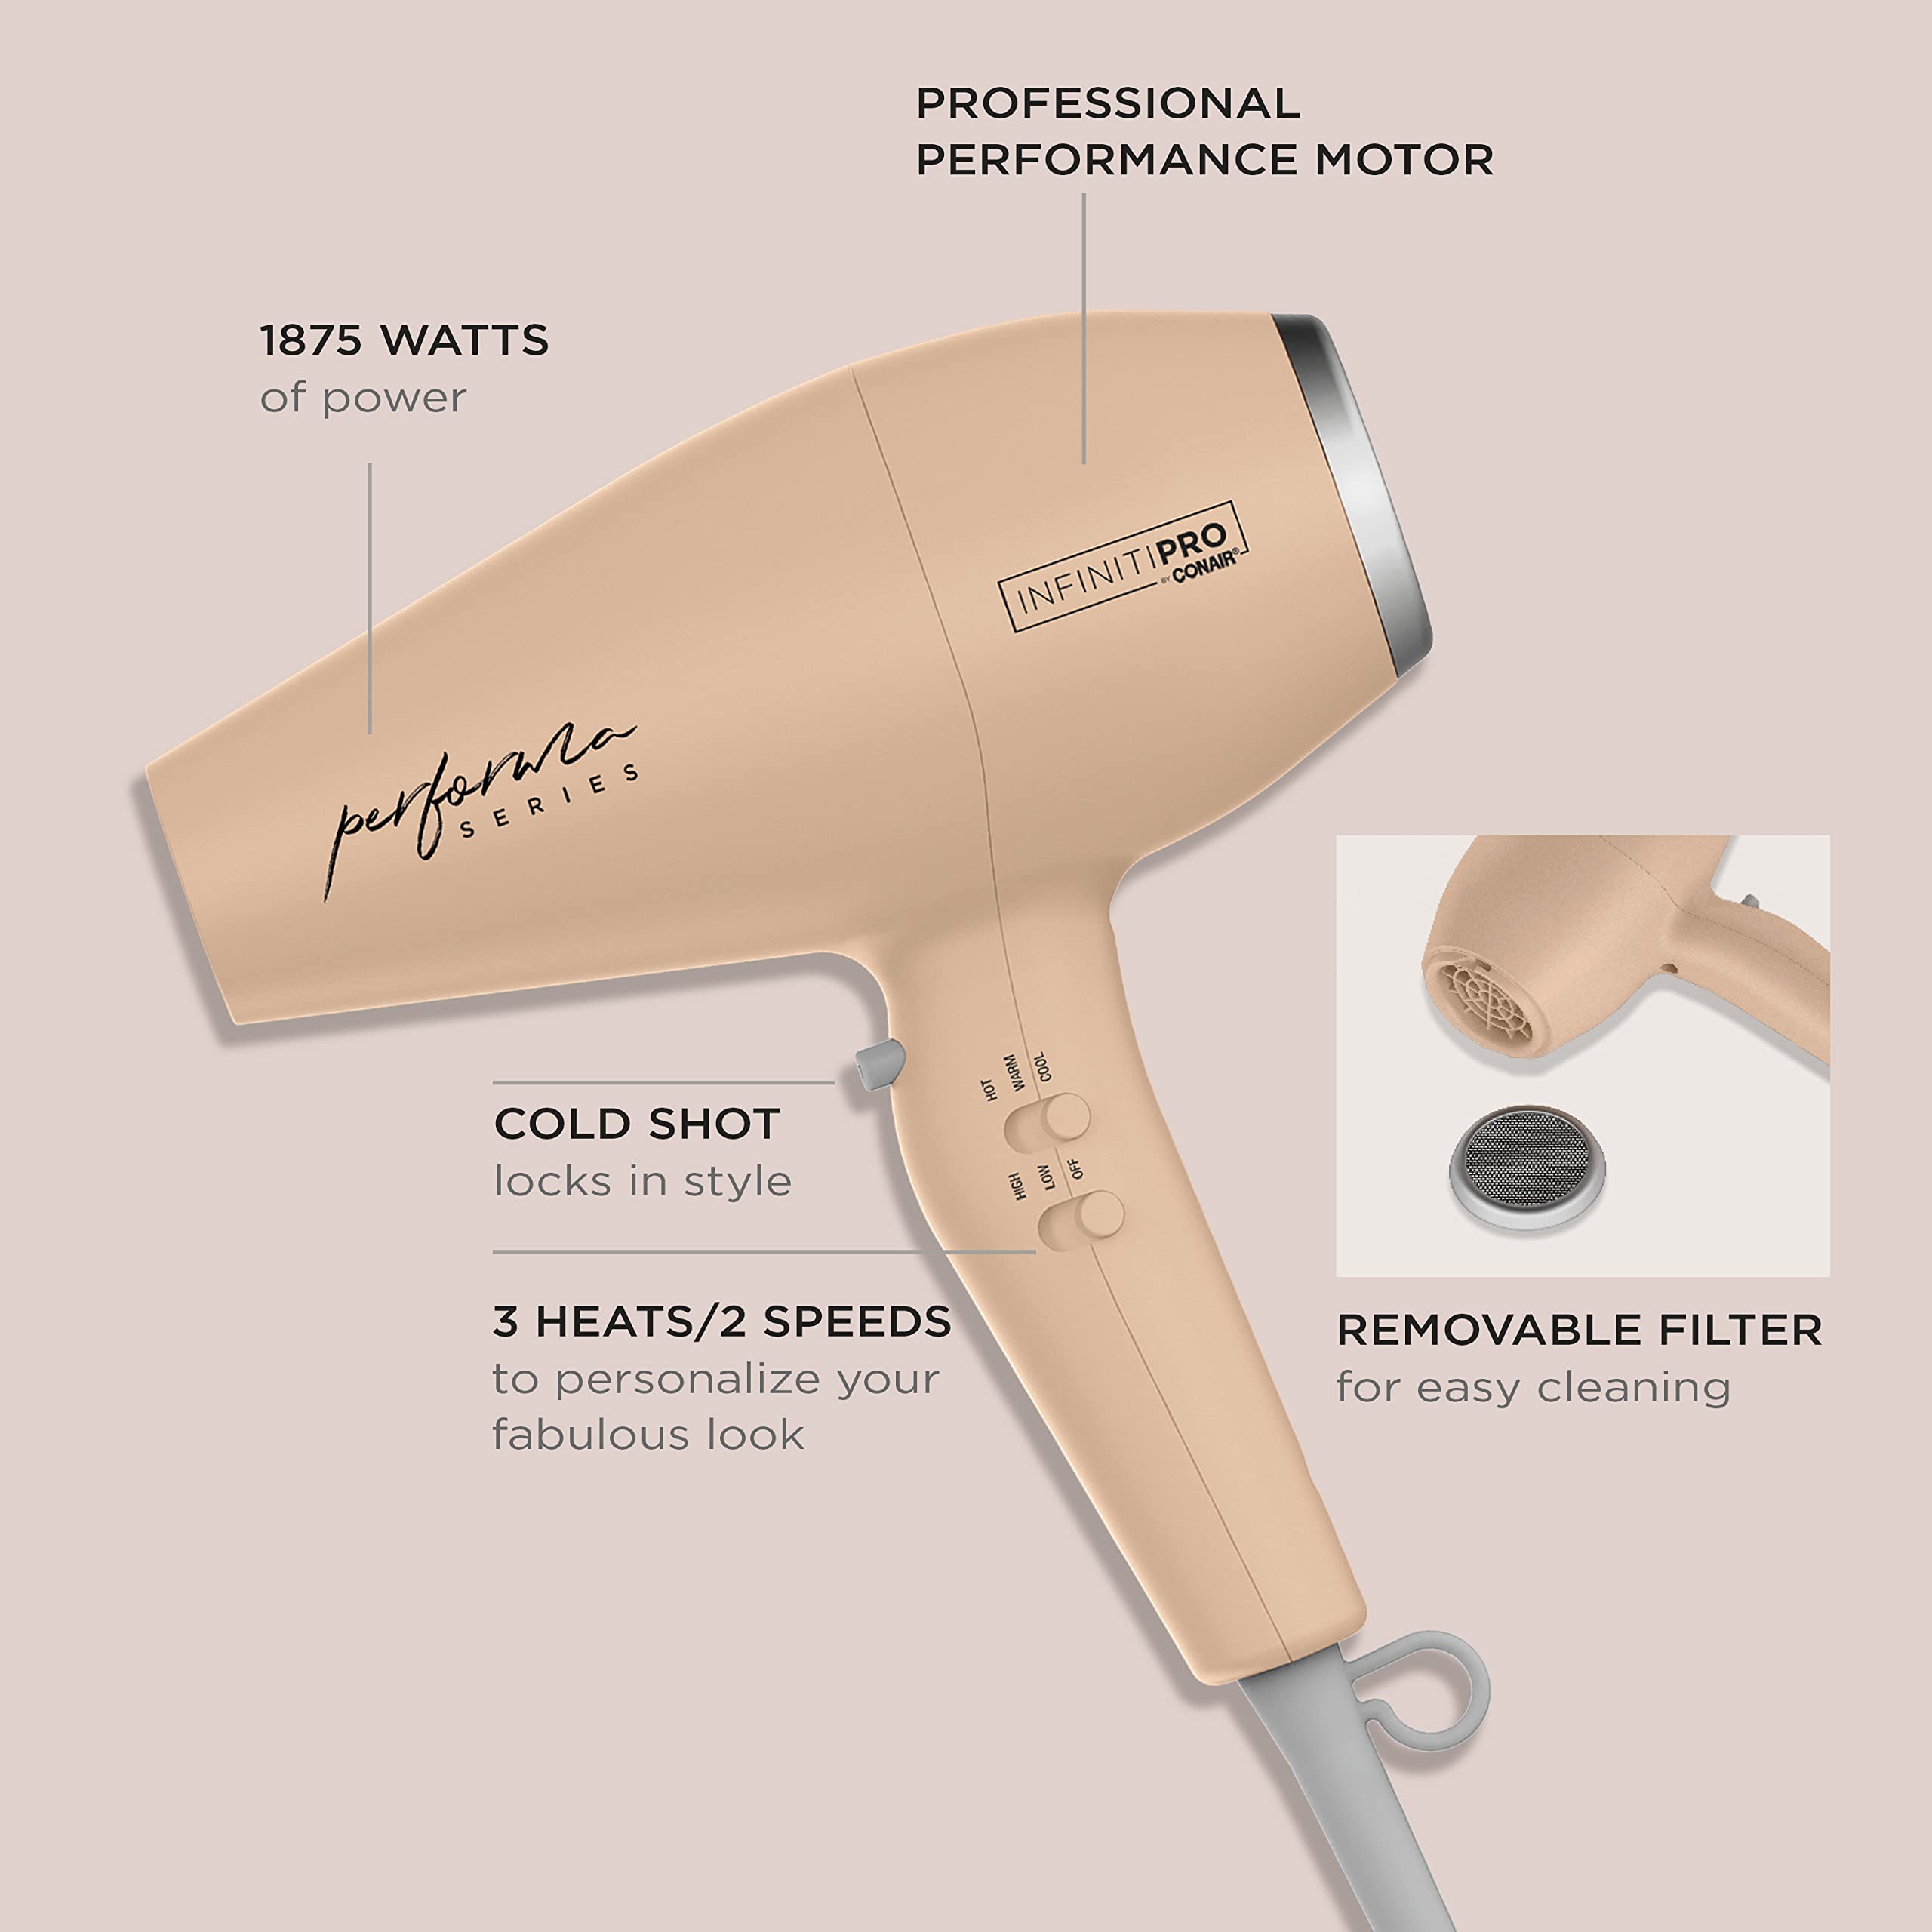 INFINITIPRO by CONAIR Performa Series Hair Dryer with Diffuser Plus 3 Other Attachments, 1875W Blow Dryer with Professional Performance Motor